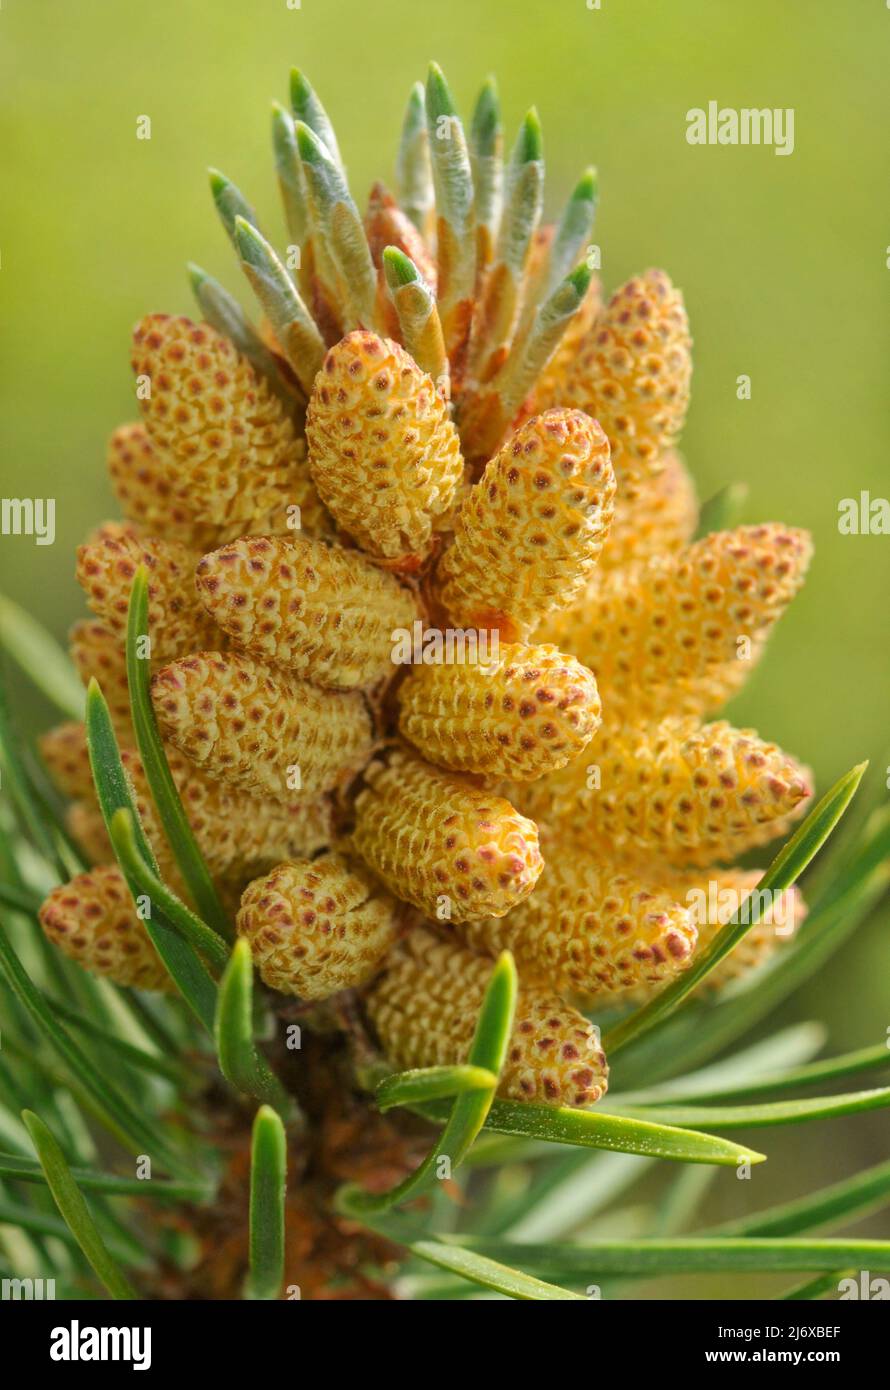 Male pinecones, pollen and new needle growth on a Lodgepole Pine tree. Stock Photo